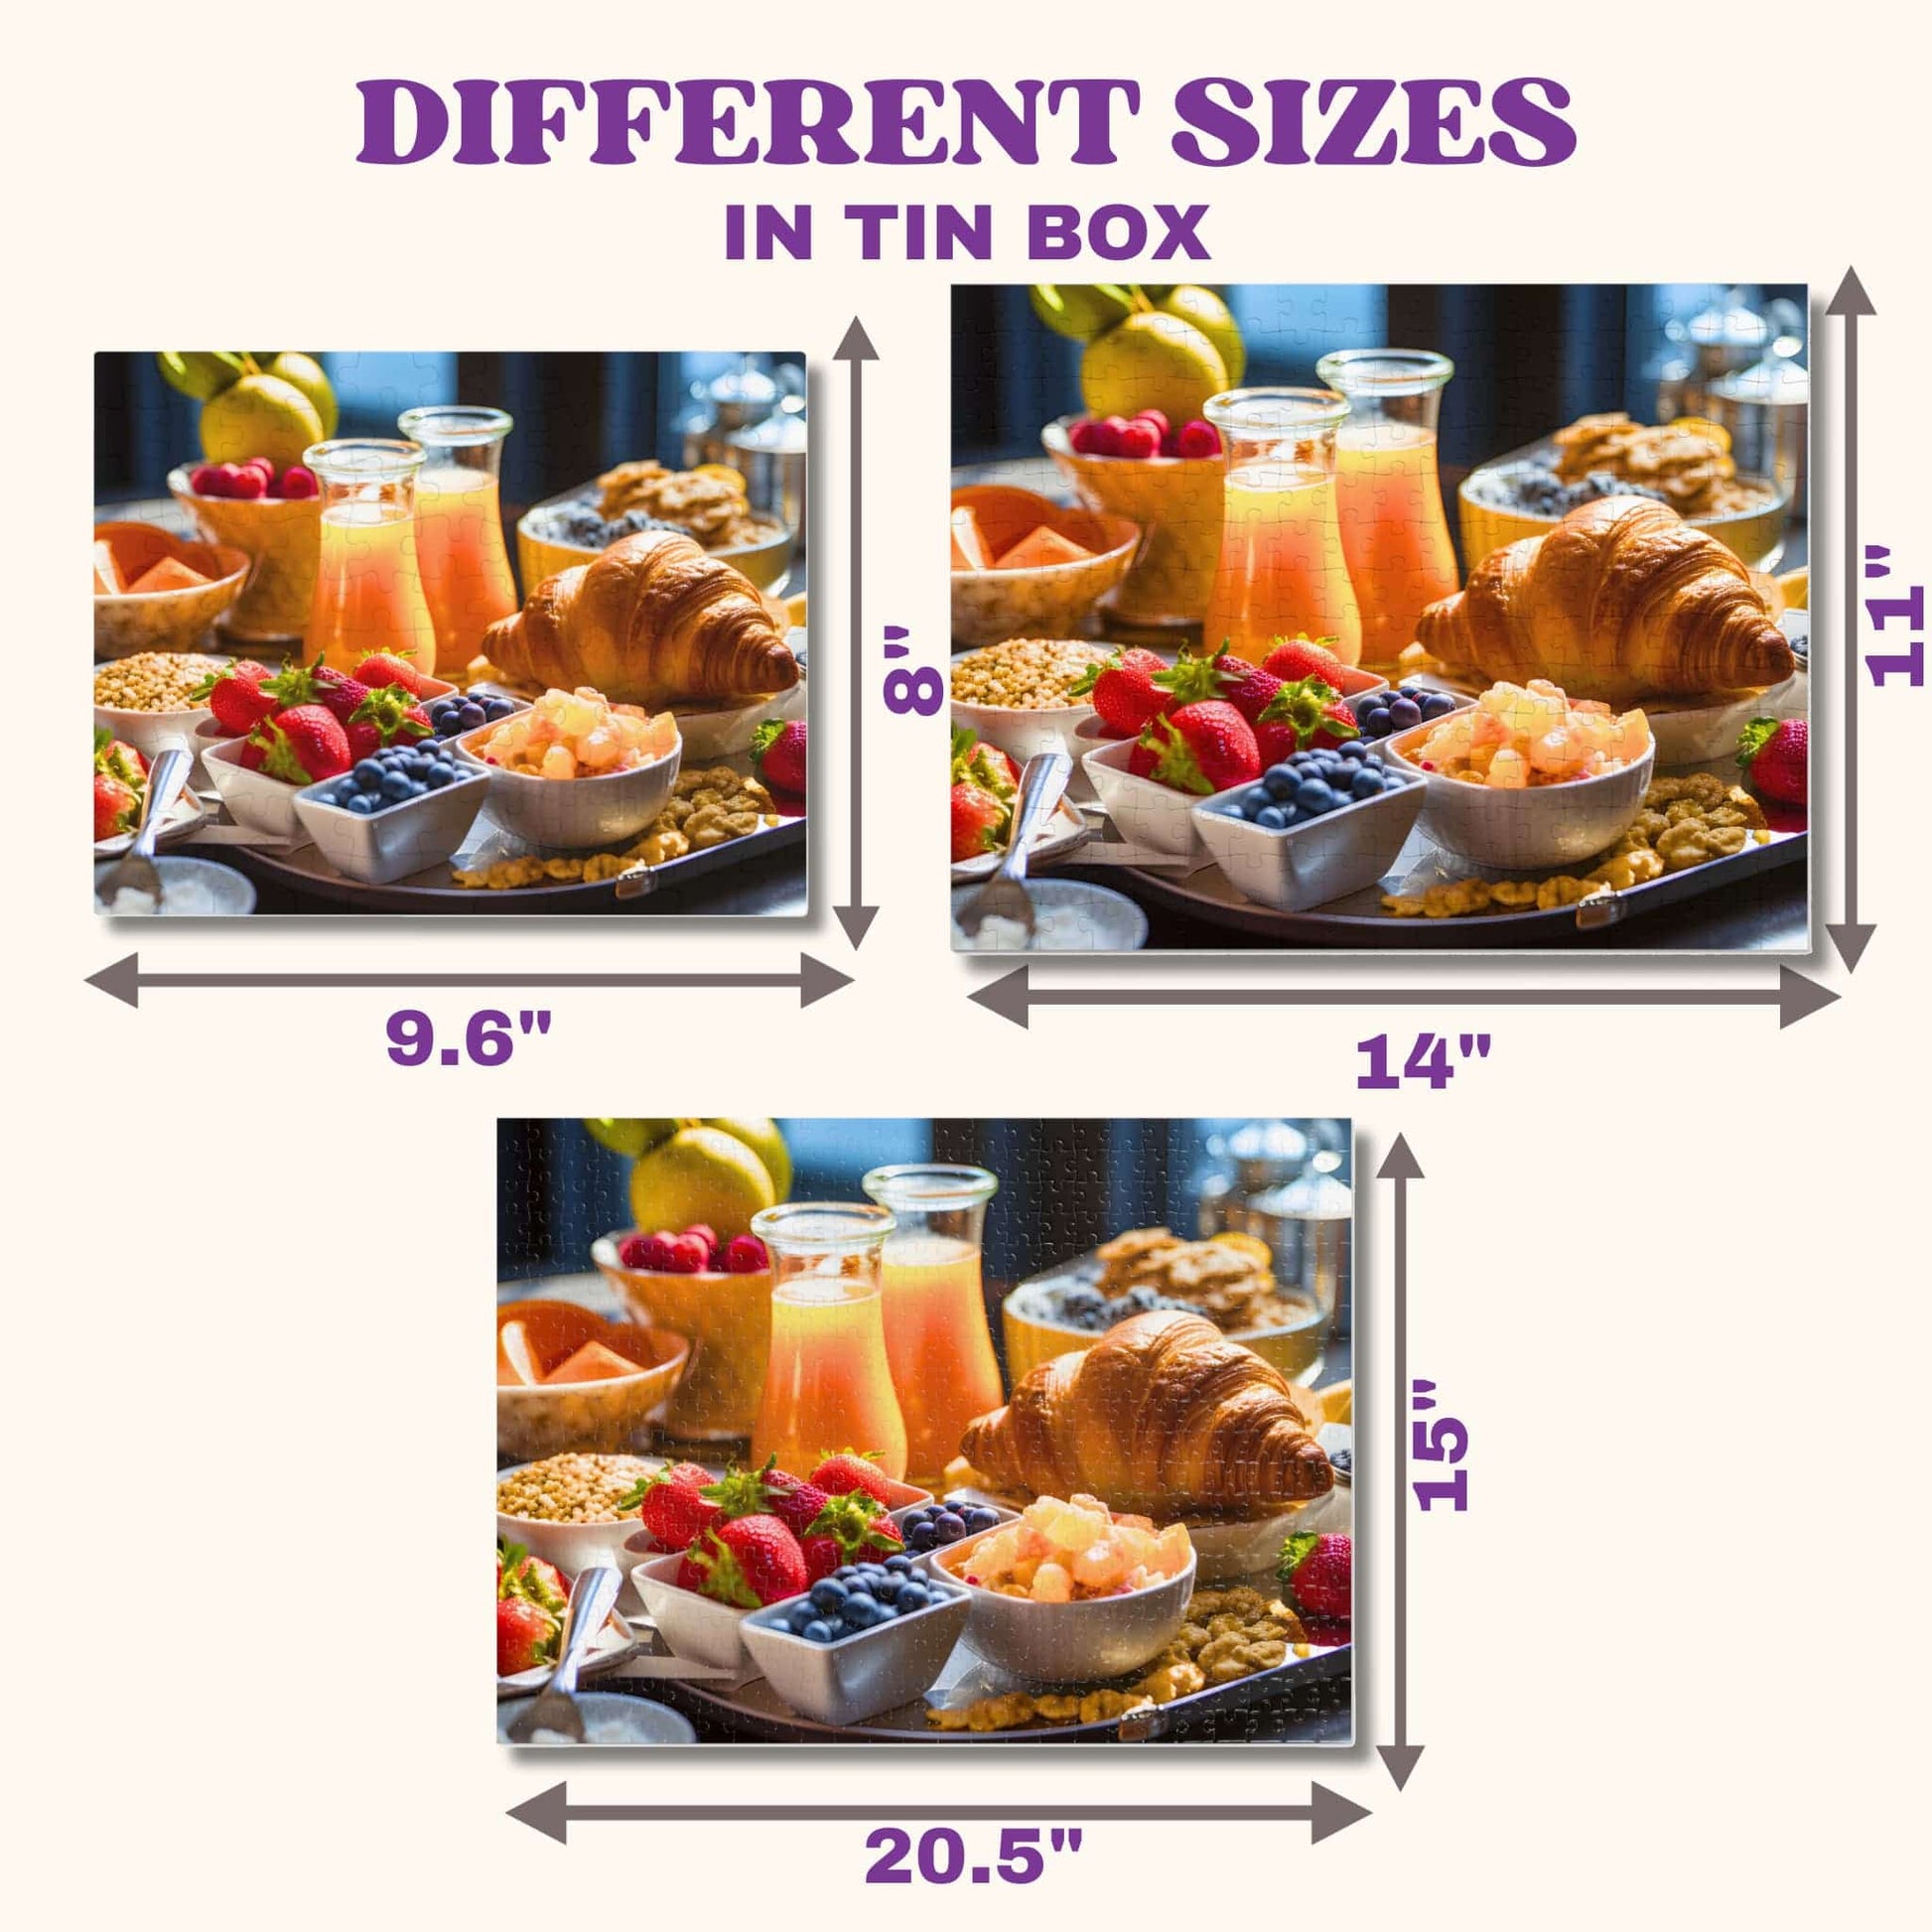 Display of the different size variations available for the Adult Jigsaw Puzzle 500 Piece, ensuring the right fit for every family's game night.